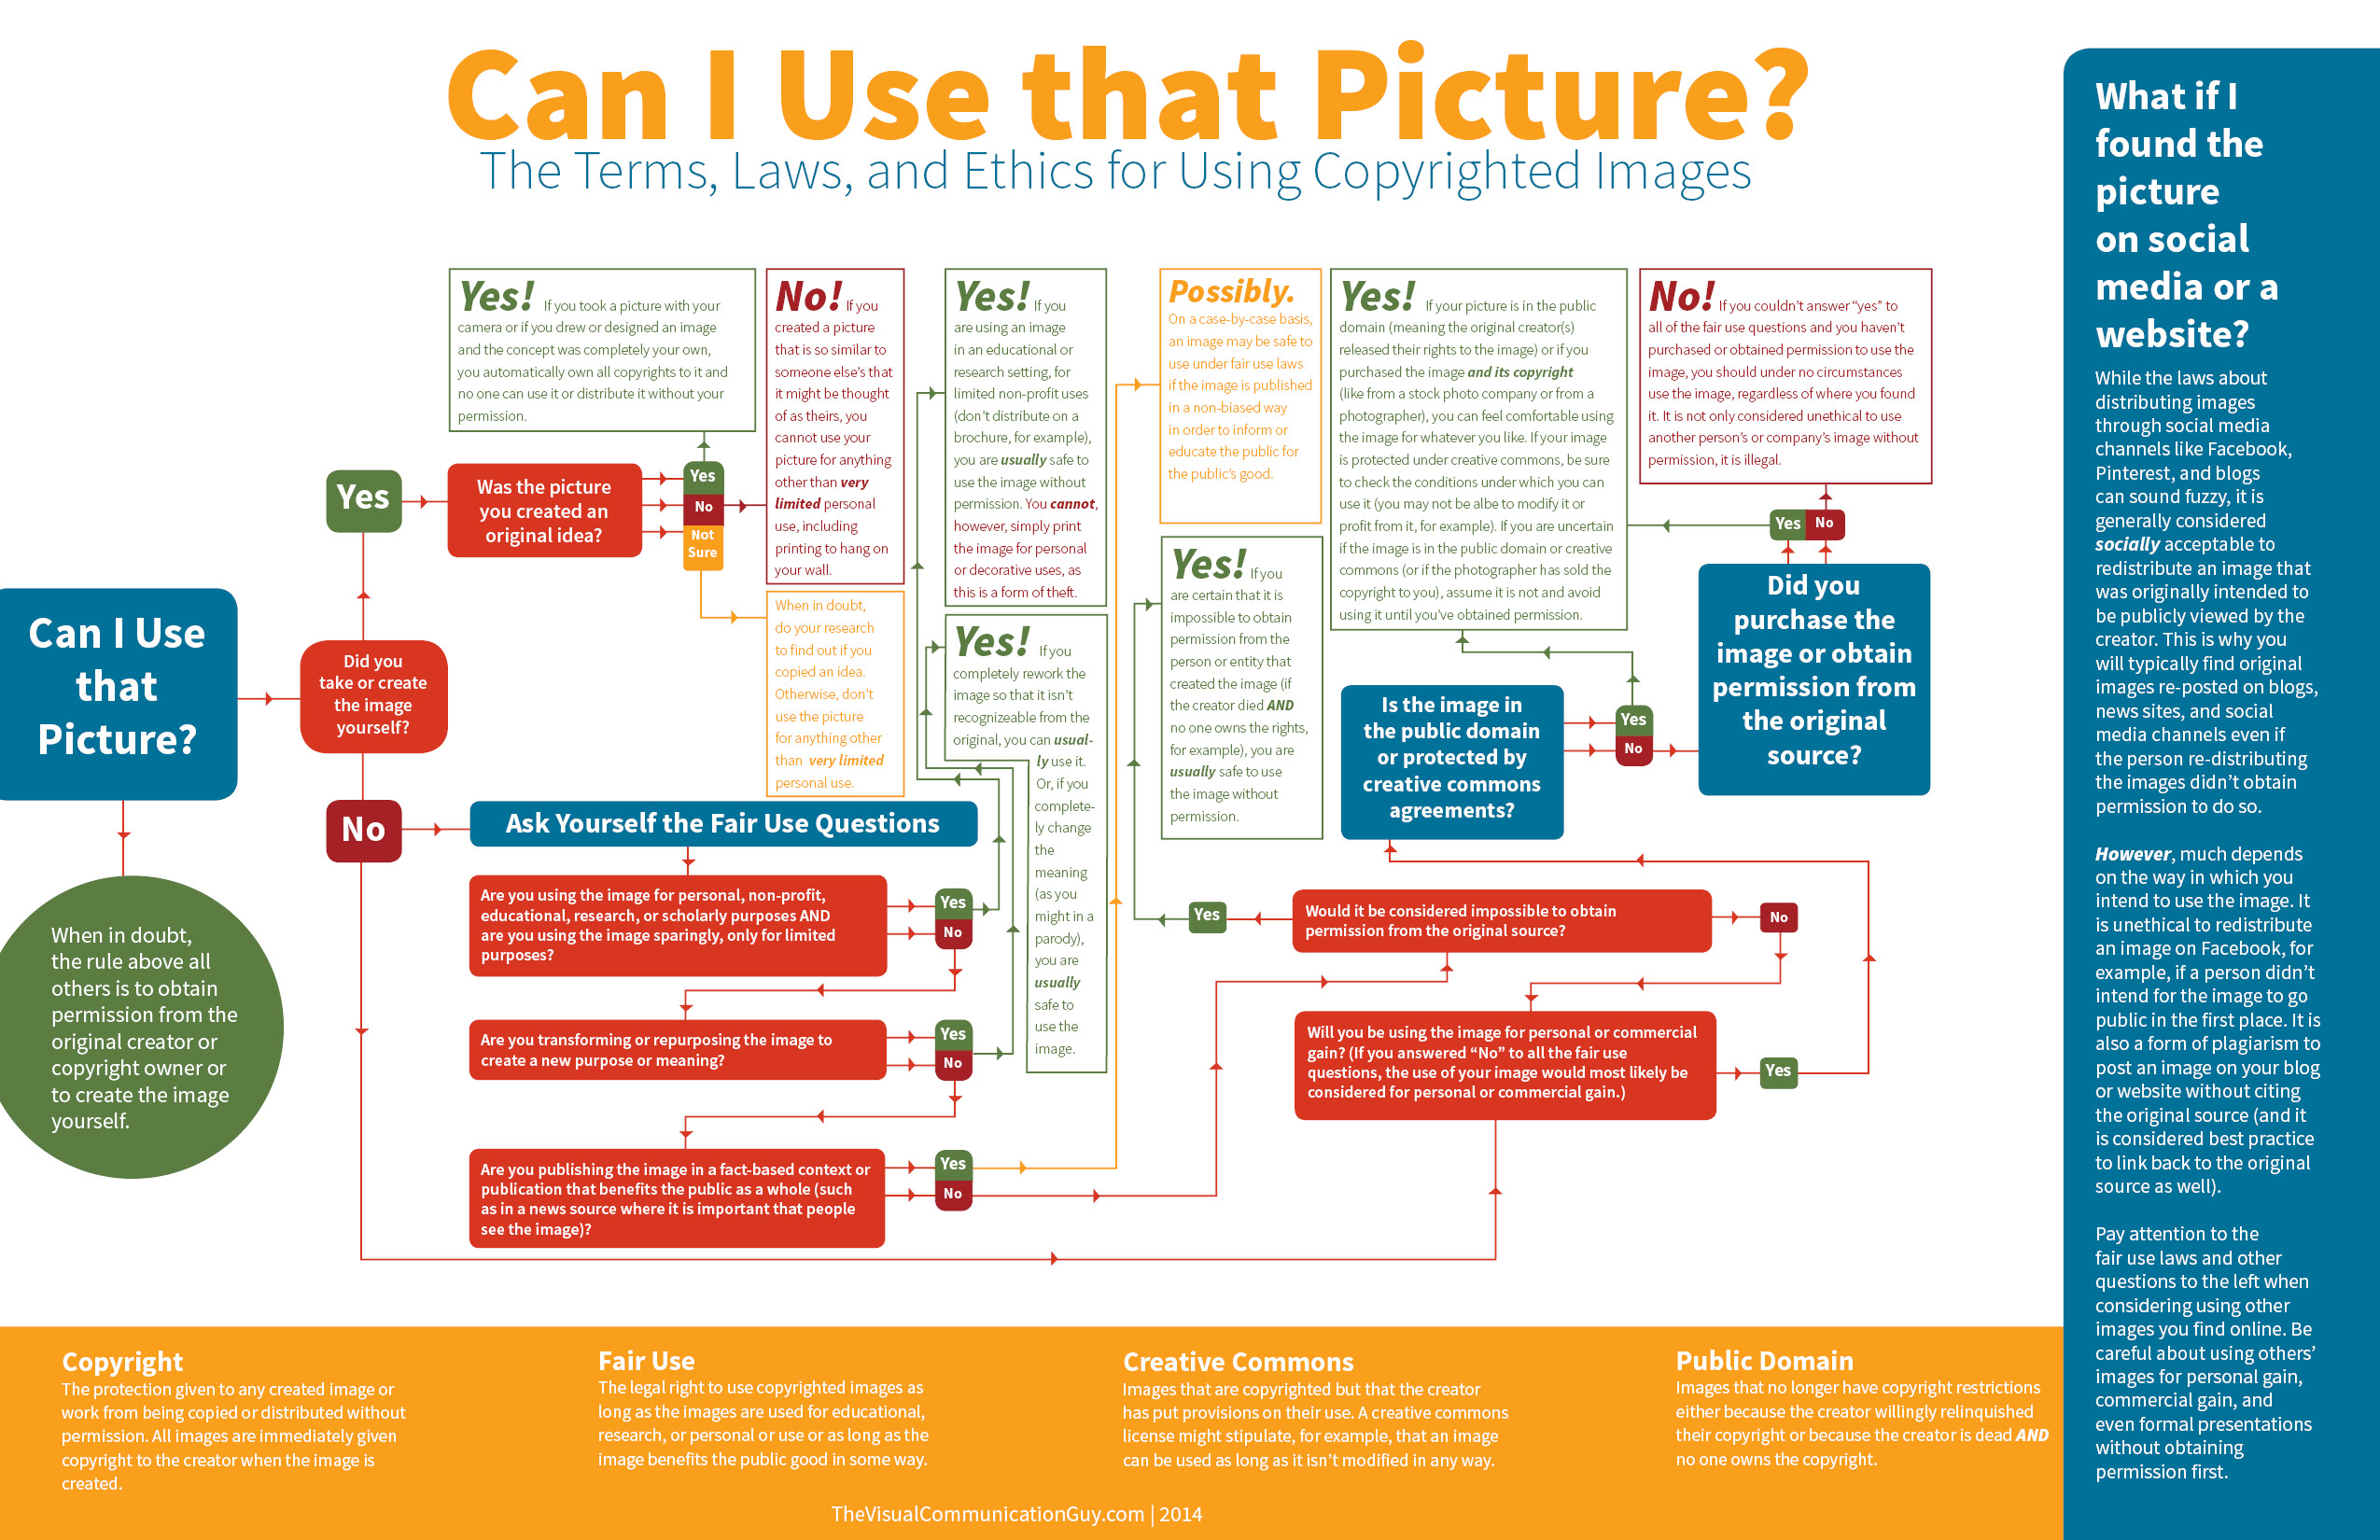 Photo Copyright 19: Is it Legal to Use Photos from the Internet